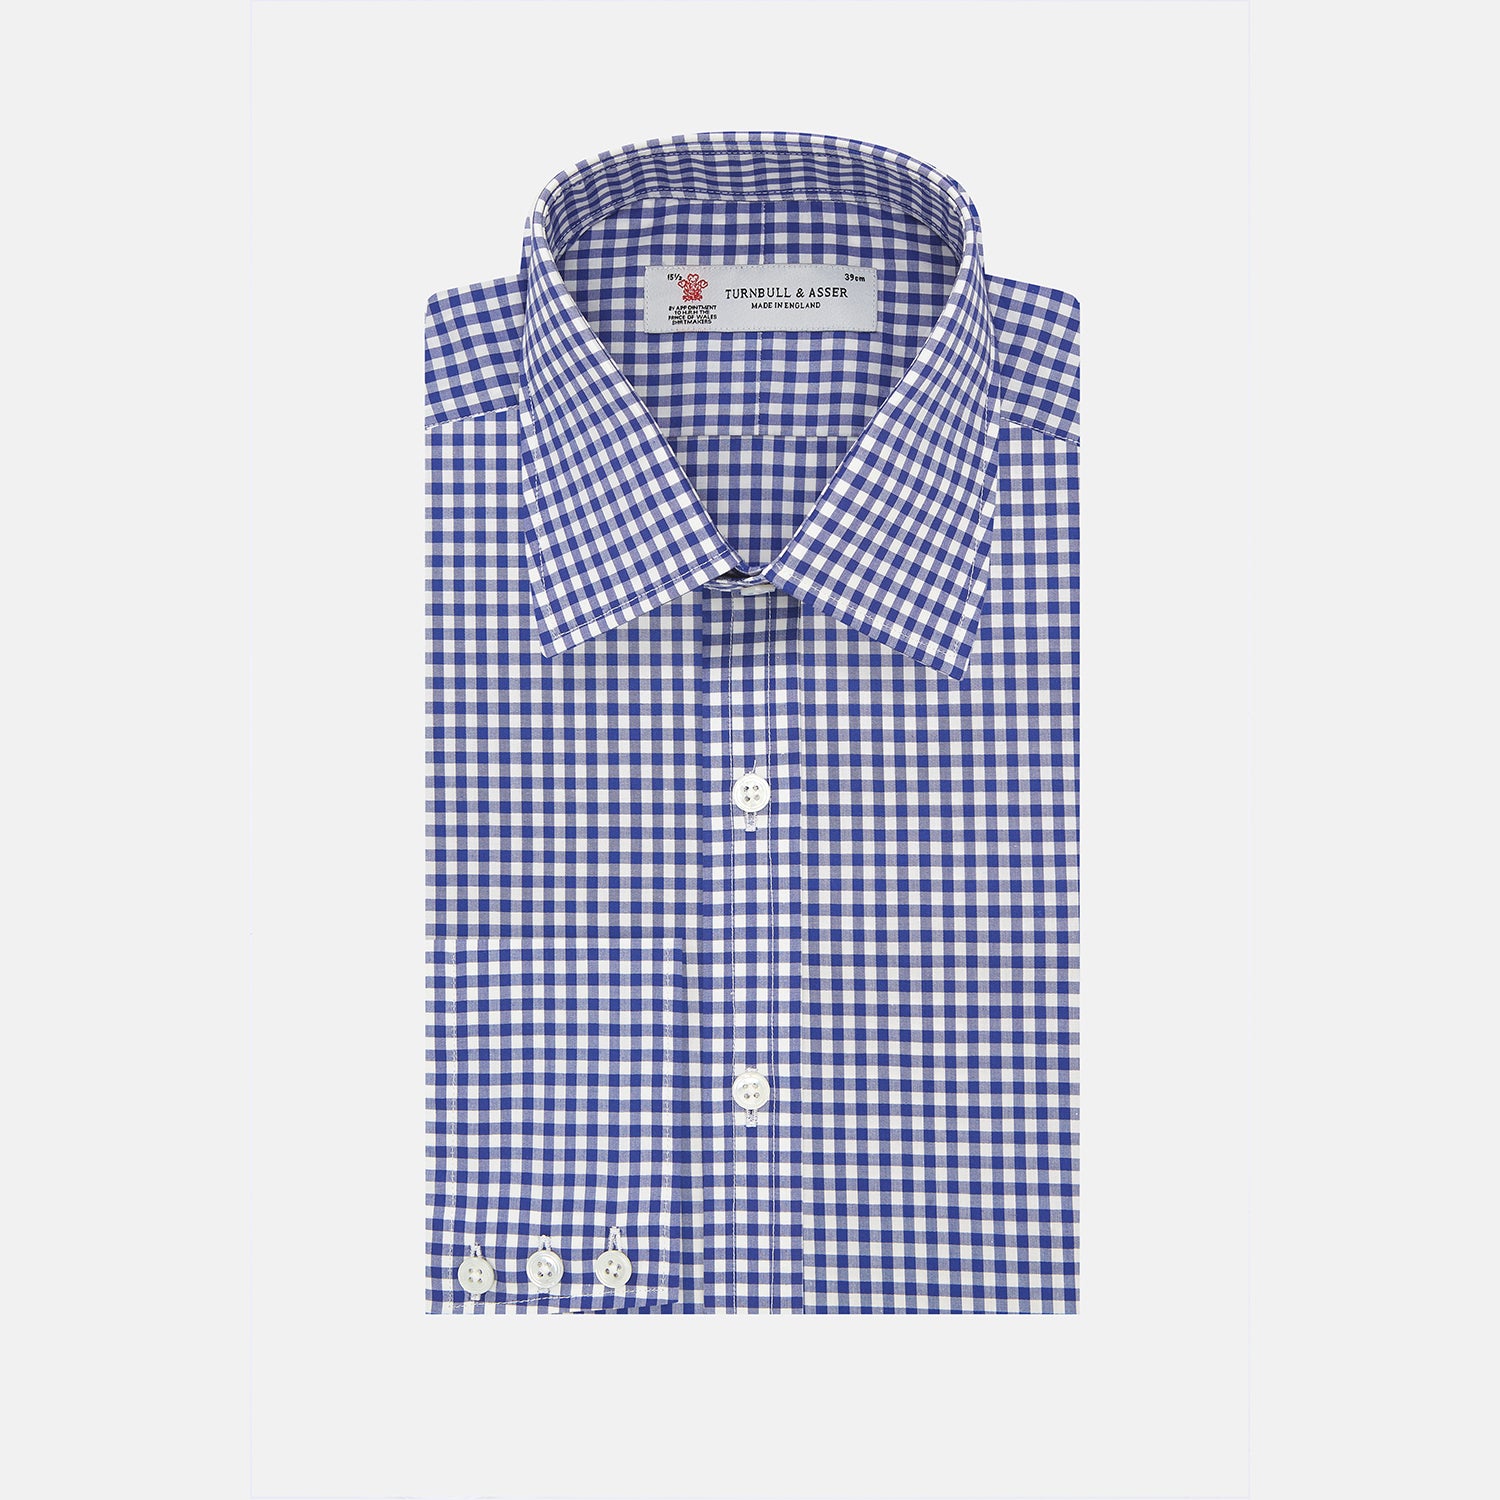 Navy & White Gingham Check Cotton Regular Fit Shirt with T&A Collar & 3-Button Cuffs